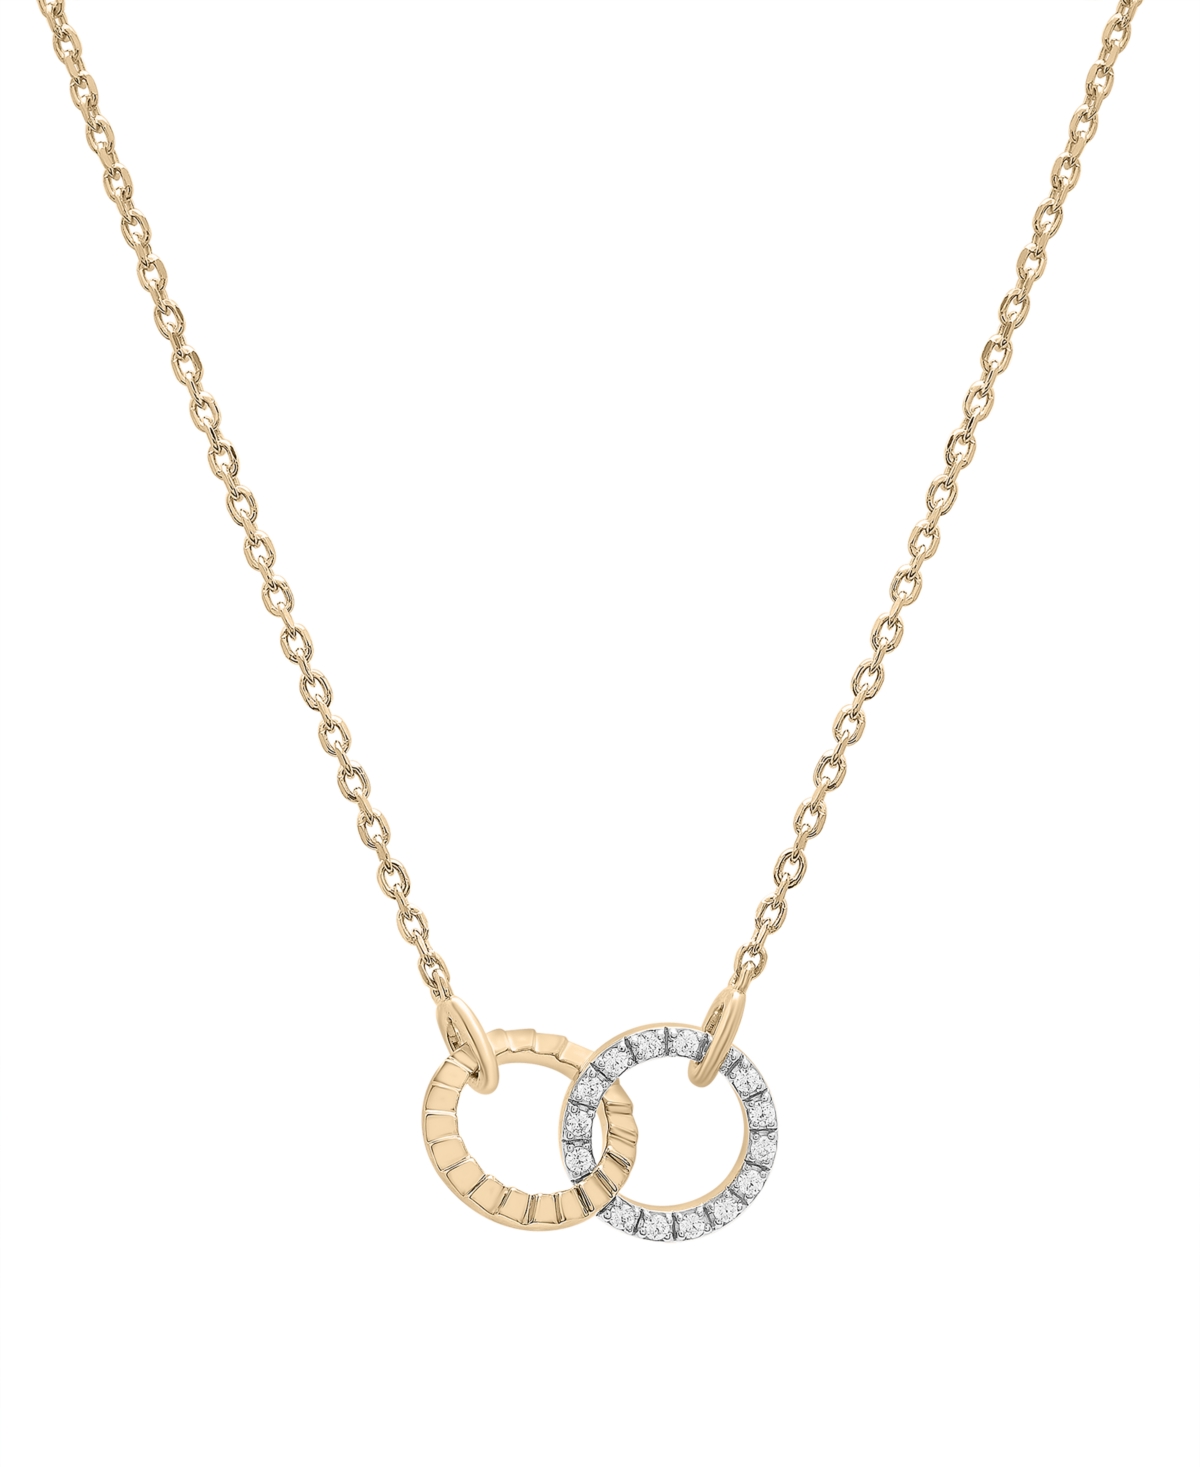 Diamond Connected Circles 18" Pendant Necklace (1/10 ct. t.w.) in Gold Vermeil, Created for Macy's - Gold Vermeil